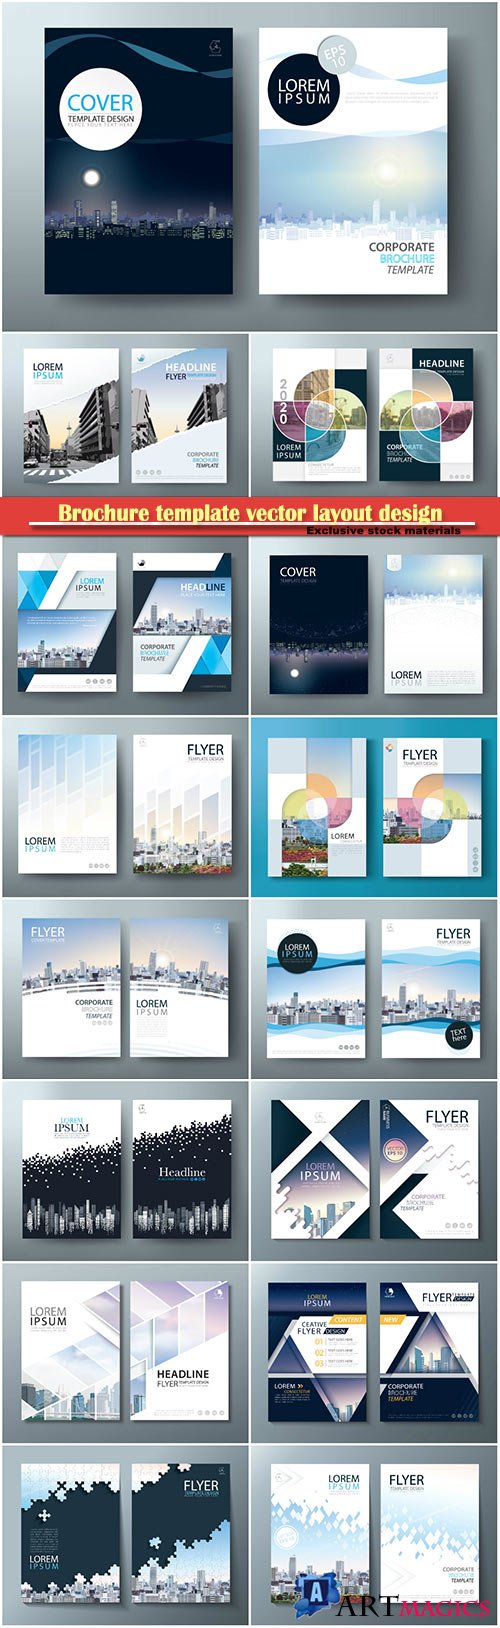 Brochure template vector layout design, corporate business annual report, magazine, flyer mockup # 208